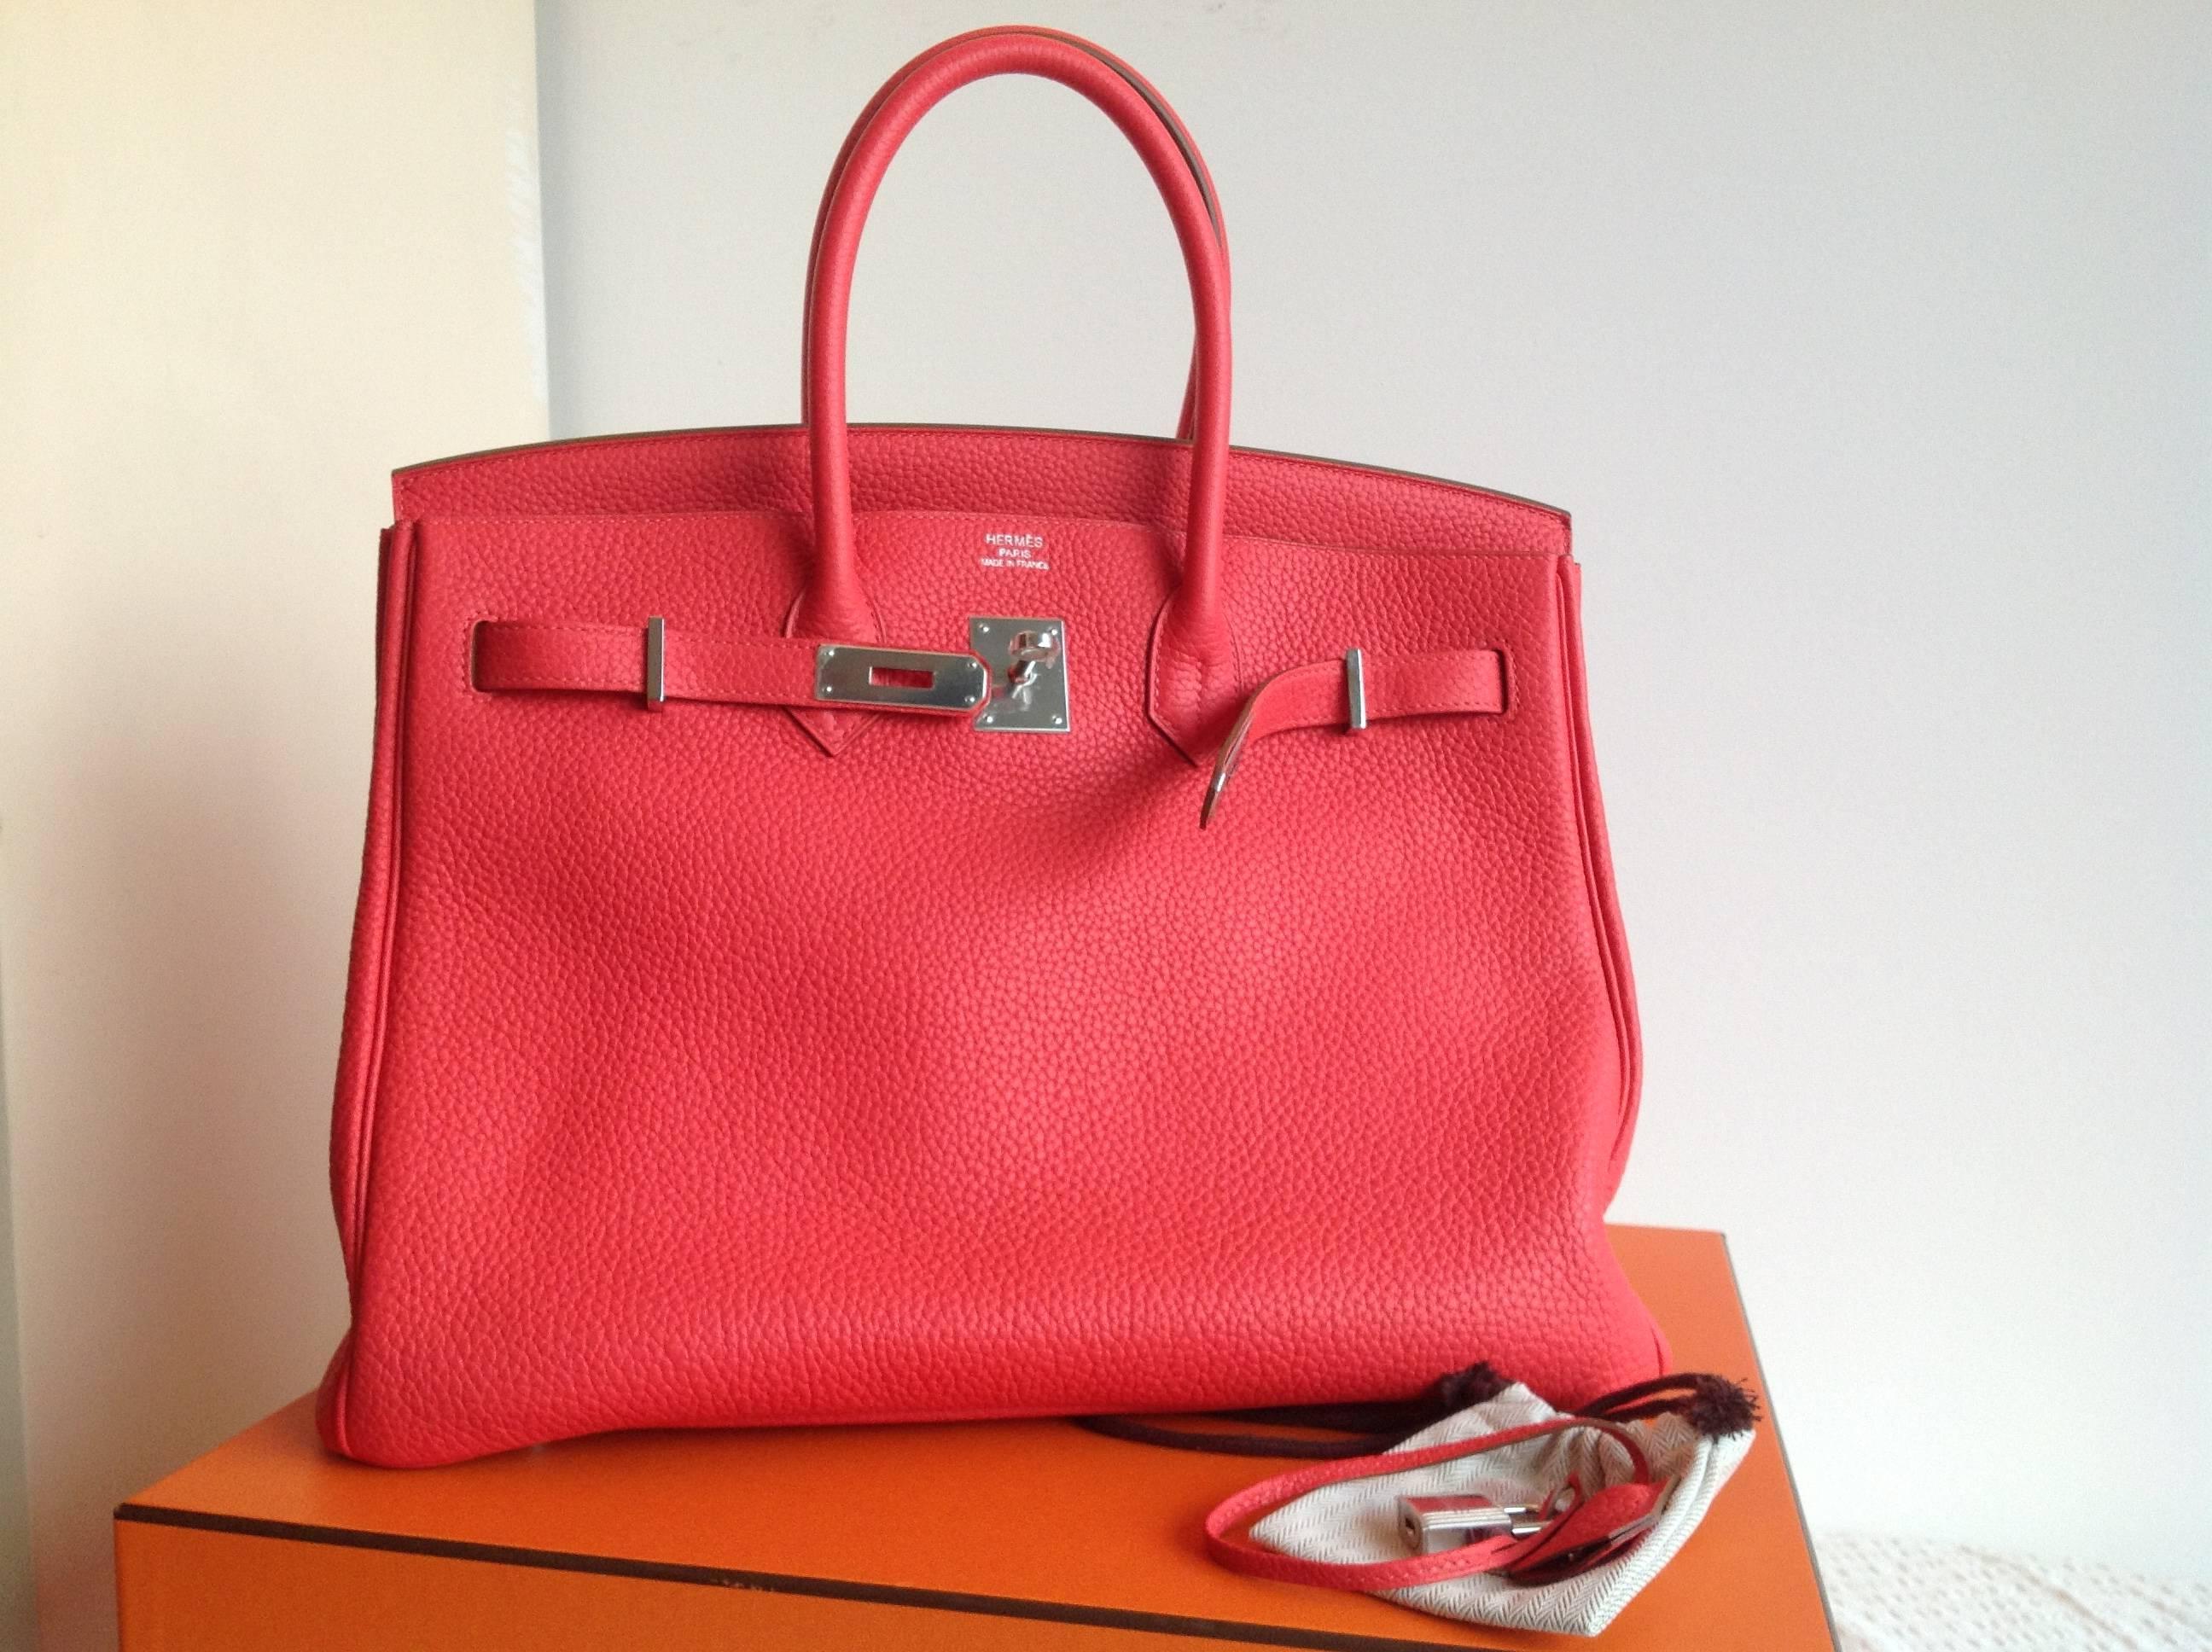 Stunning color rose jaipur  Hermes Birkin 35 Togo leather with palladium hardware
The bag  is in pristine condition, never worn purchased in 2015.
This Birkin  comes with clochette, lock and 2 keys. Plastics on all hardwares.
Interior is lined in